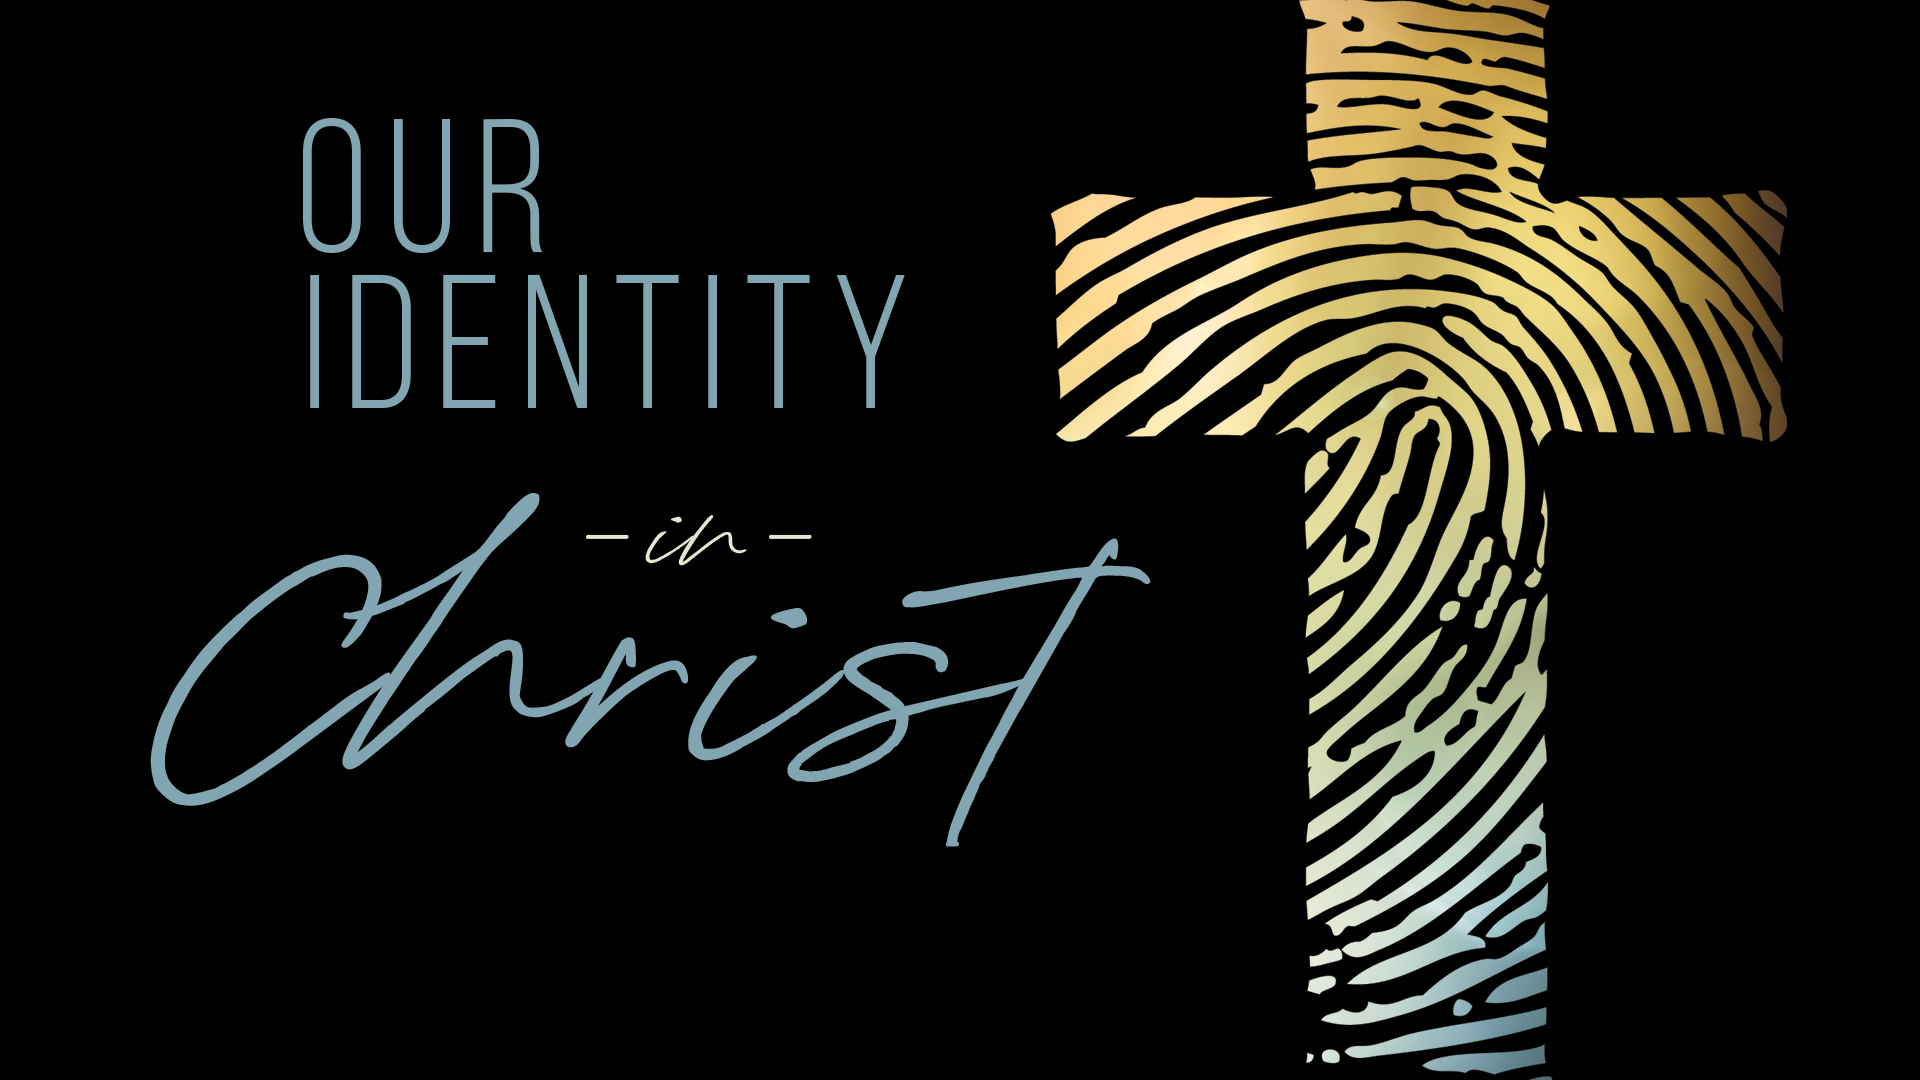 Our Identity in Christ: Chosen and Called